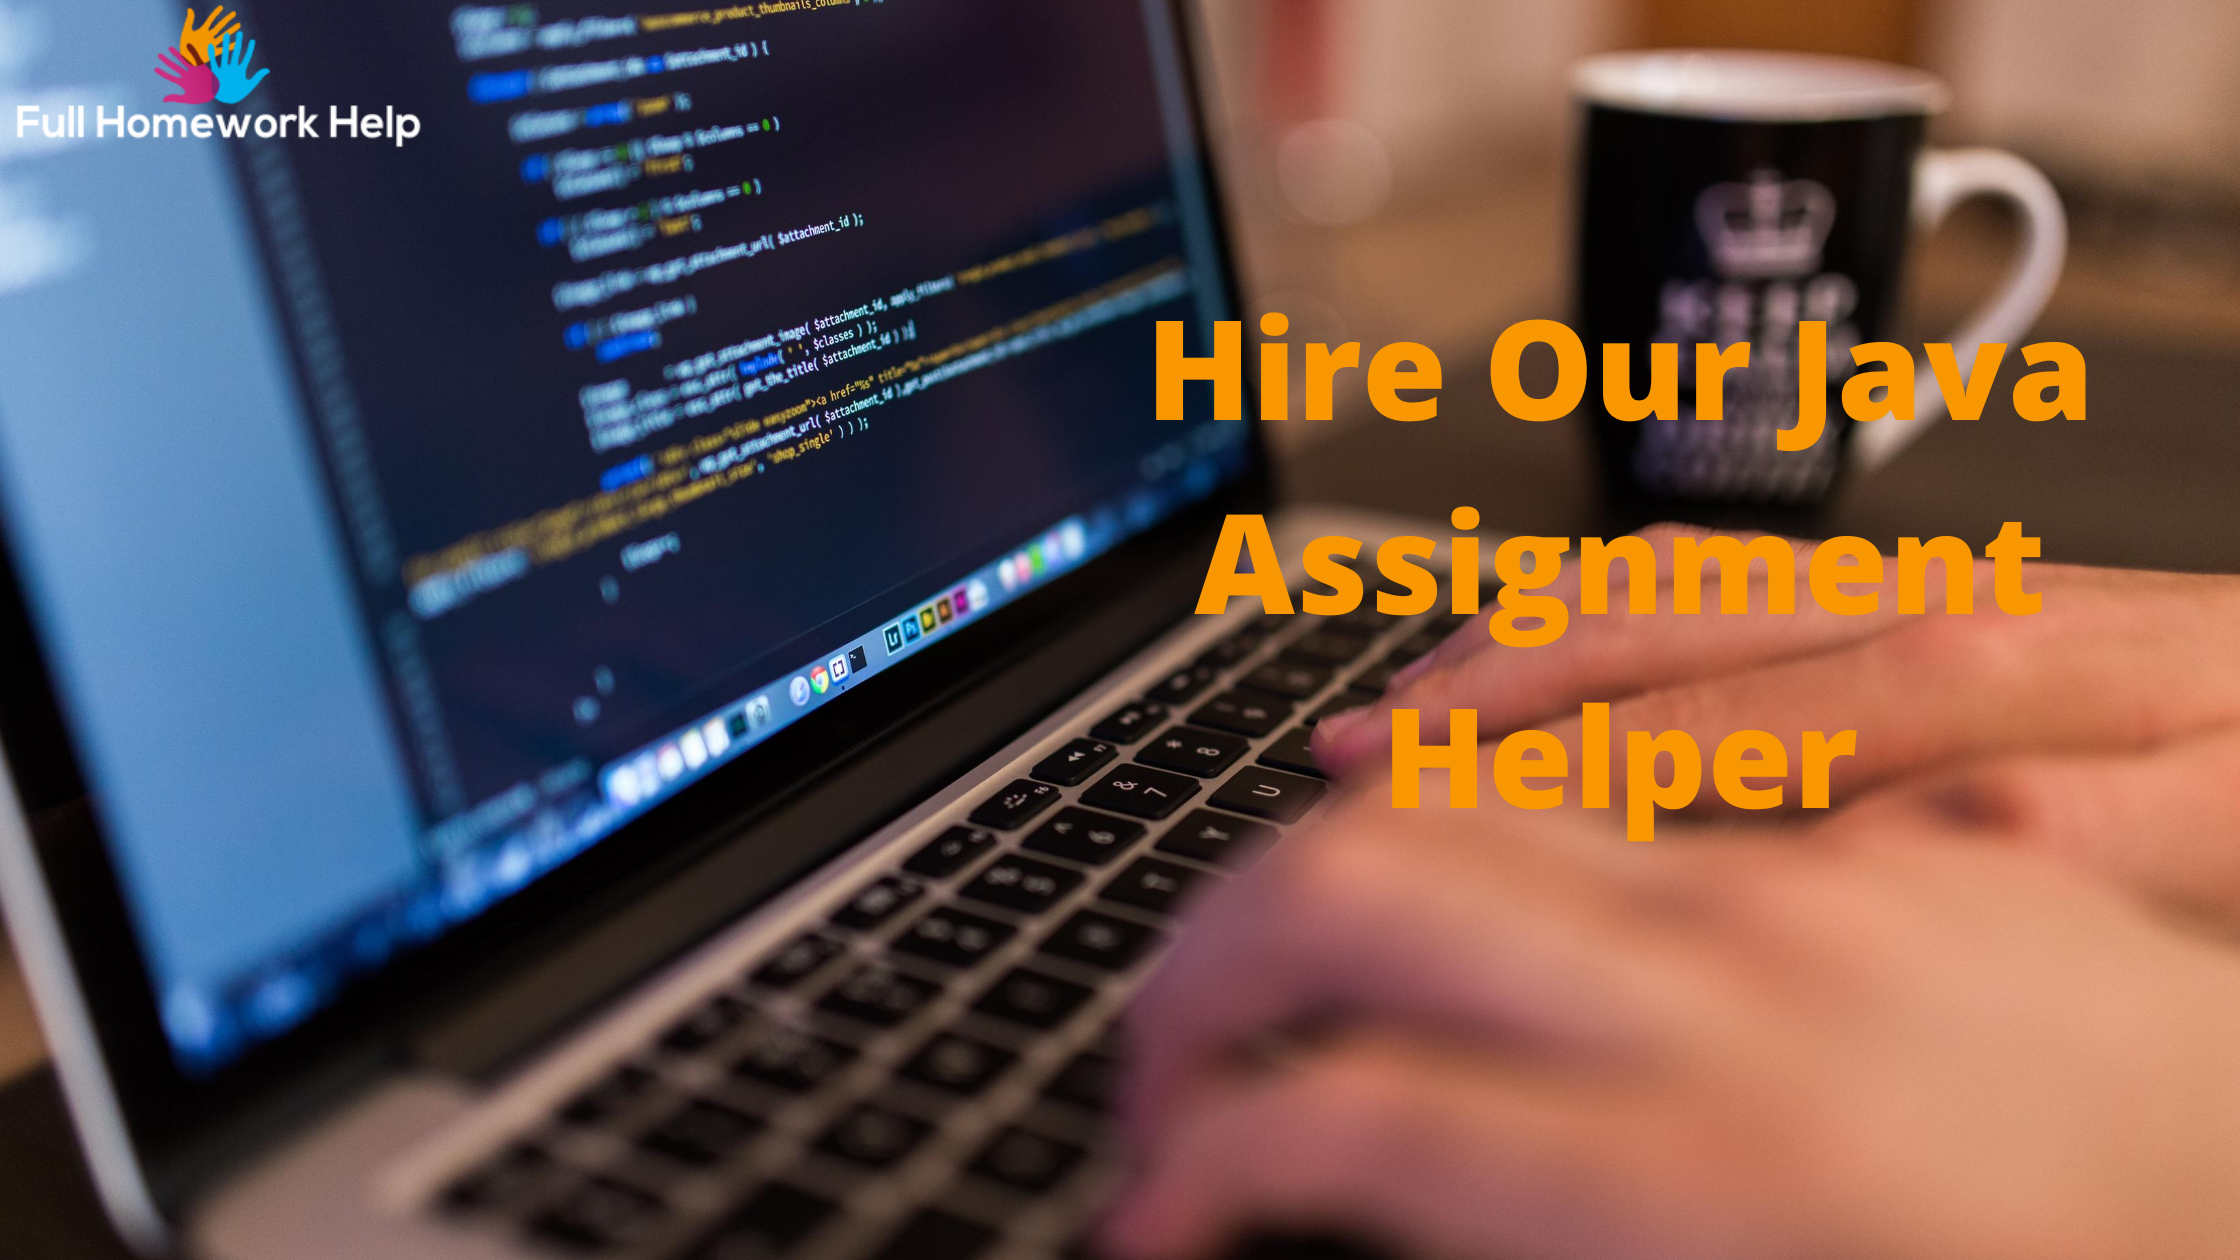 Hire Our Java Assignment Helper